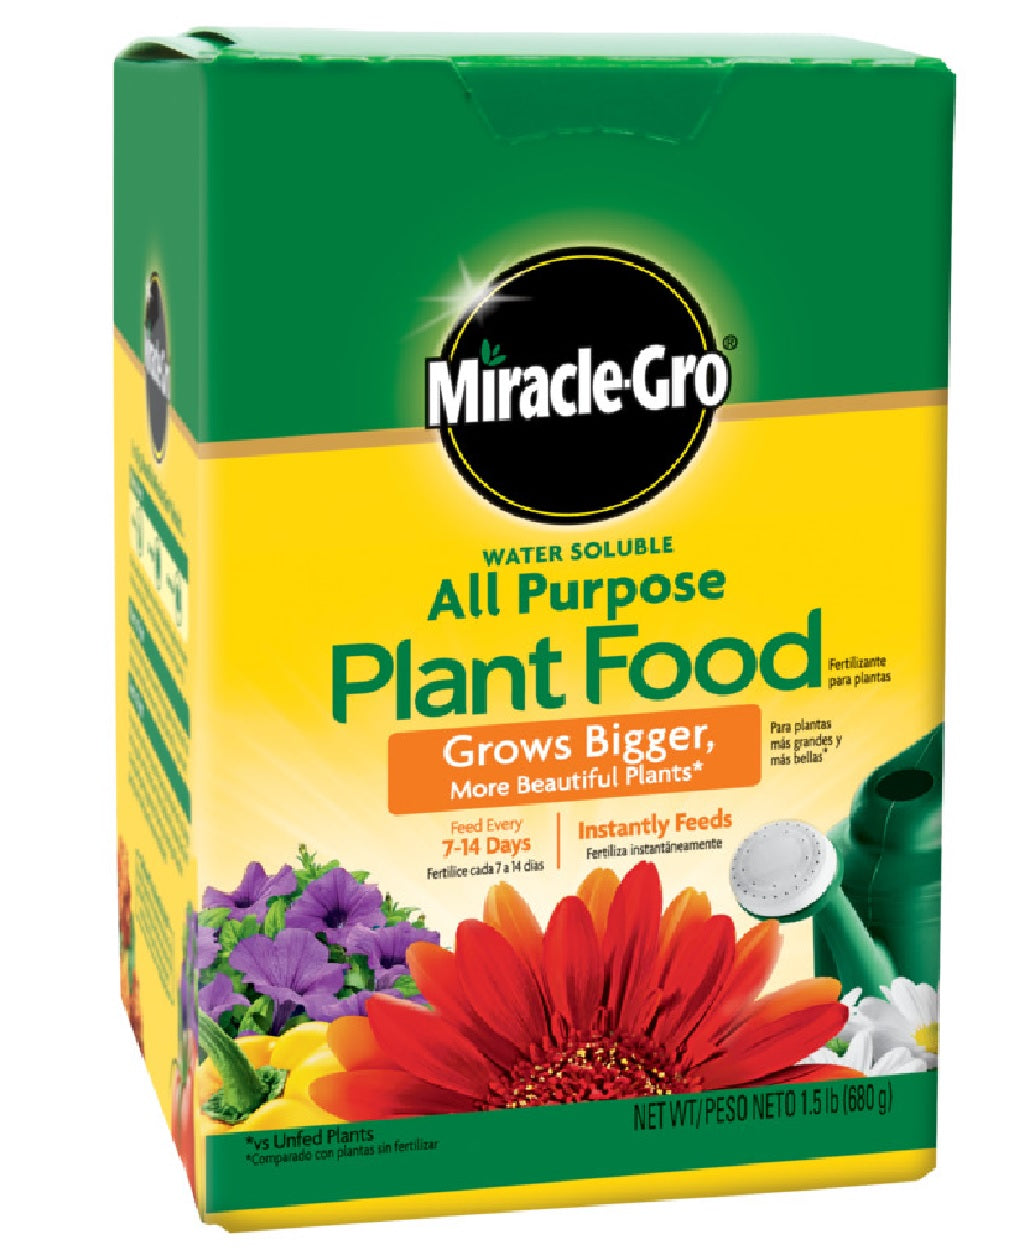 Miracle-Gro 1000283 Water Soluble All Purpose Plant Food, 3 Lbs